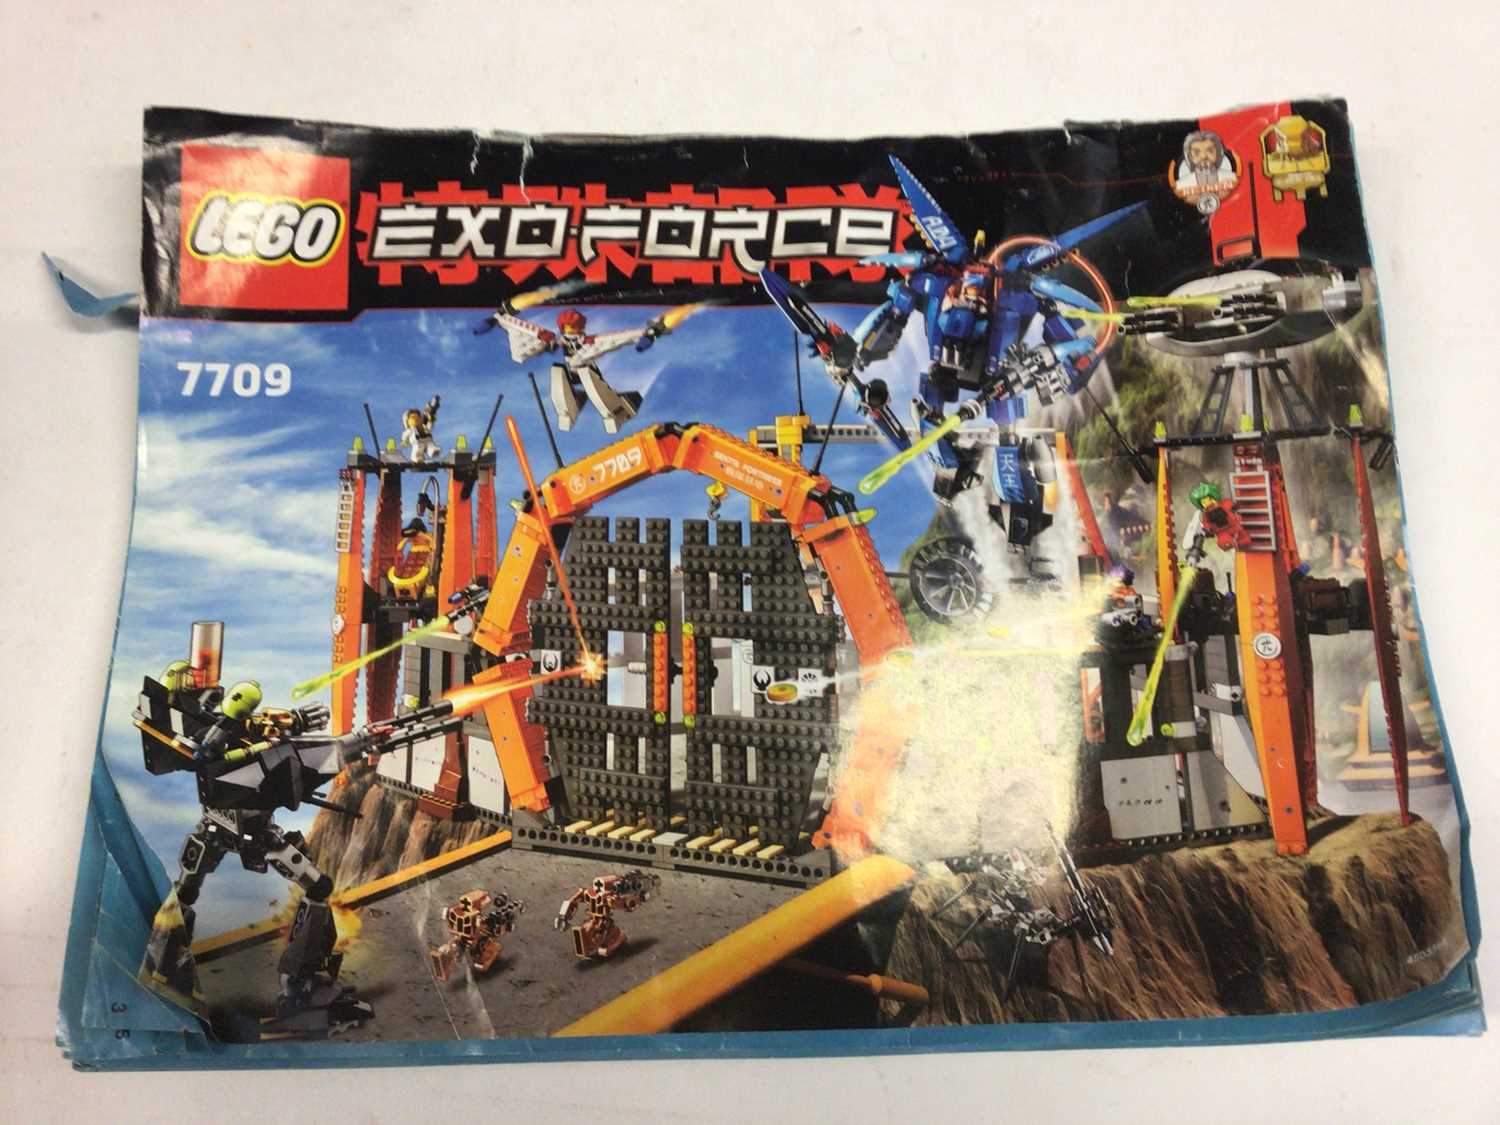 Lot 73 - Lego 6078 Castle Royal Drawbridge, 10226 Sopworth Camel, 7709 Exforce all with instructions, 4738 Harry Potter Haggards Hut with instructions available on line